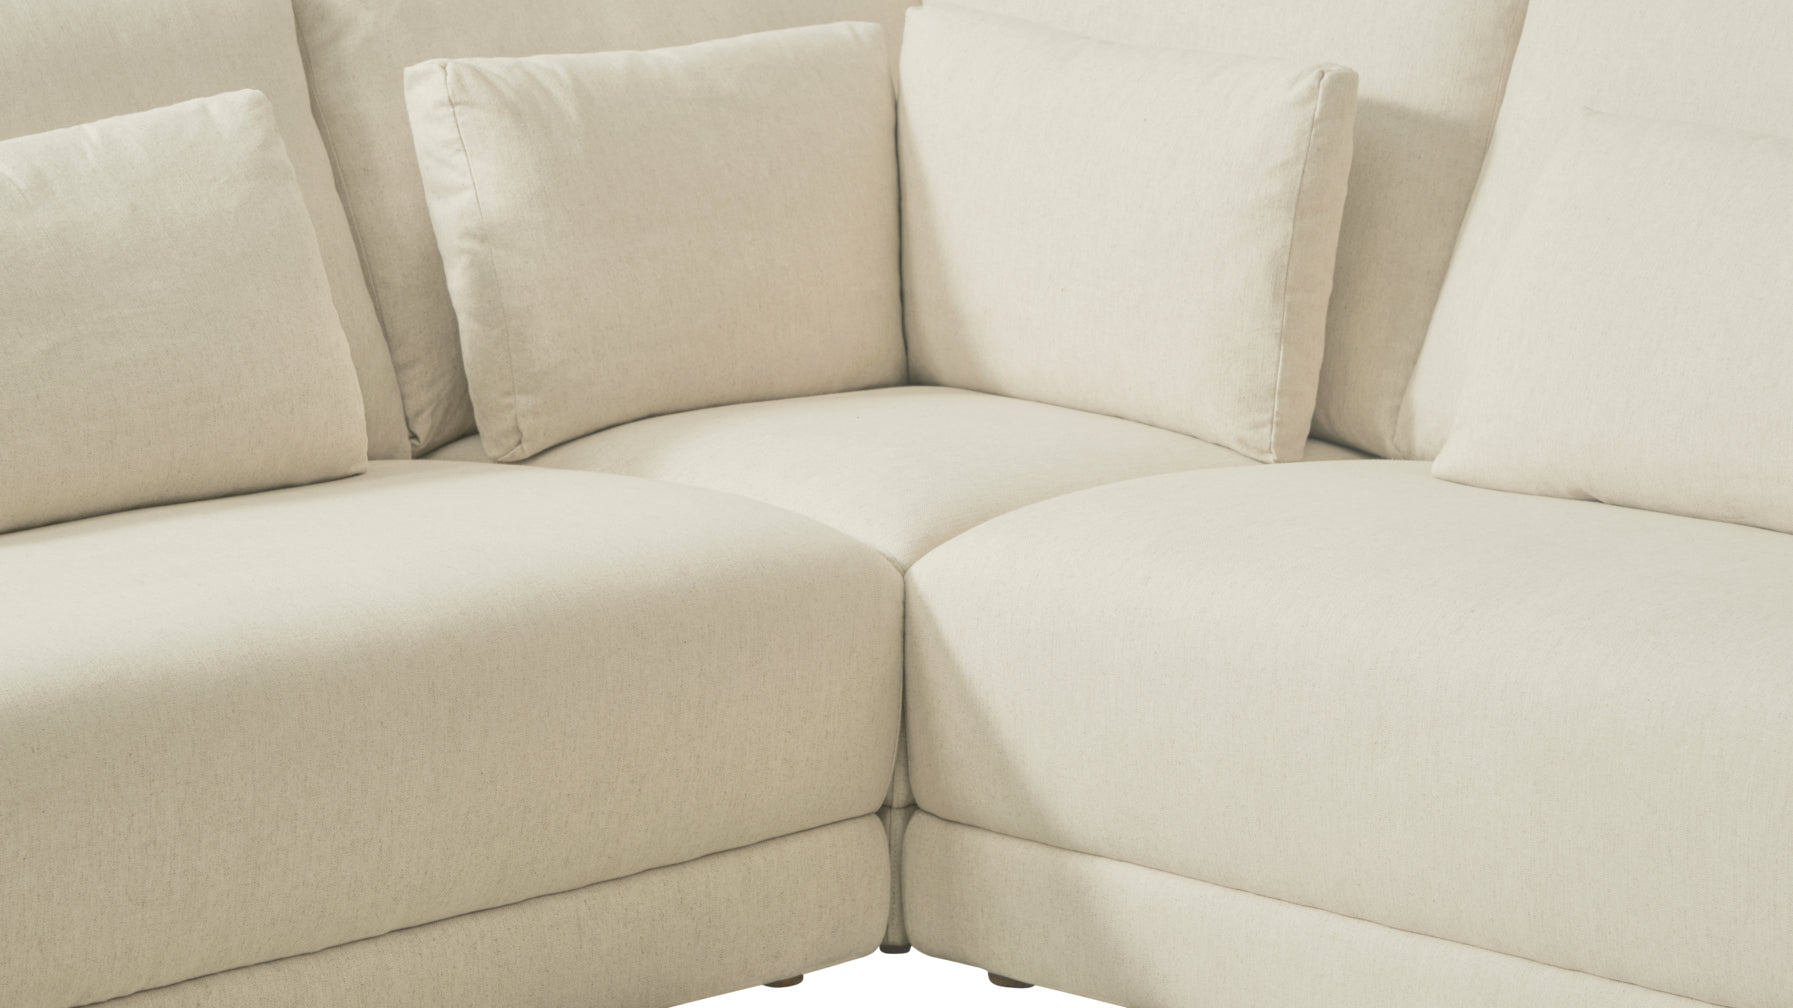 Wind Down 5-Piece Modular Sectional Closed, Beach - Image 6